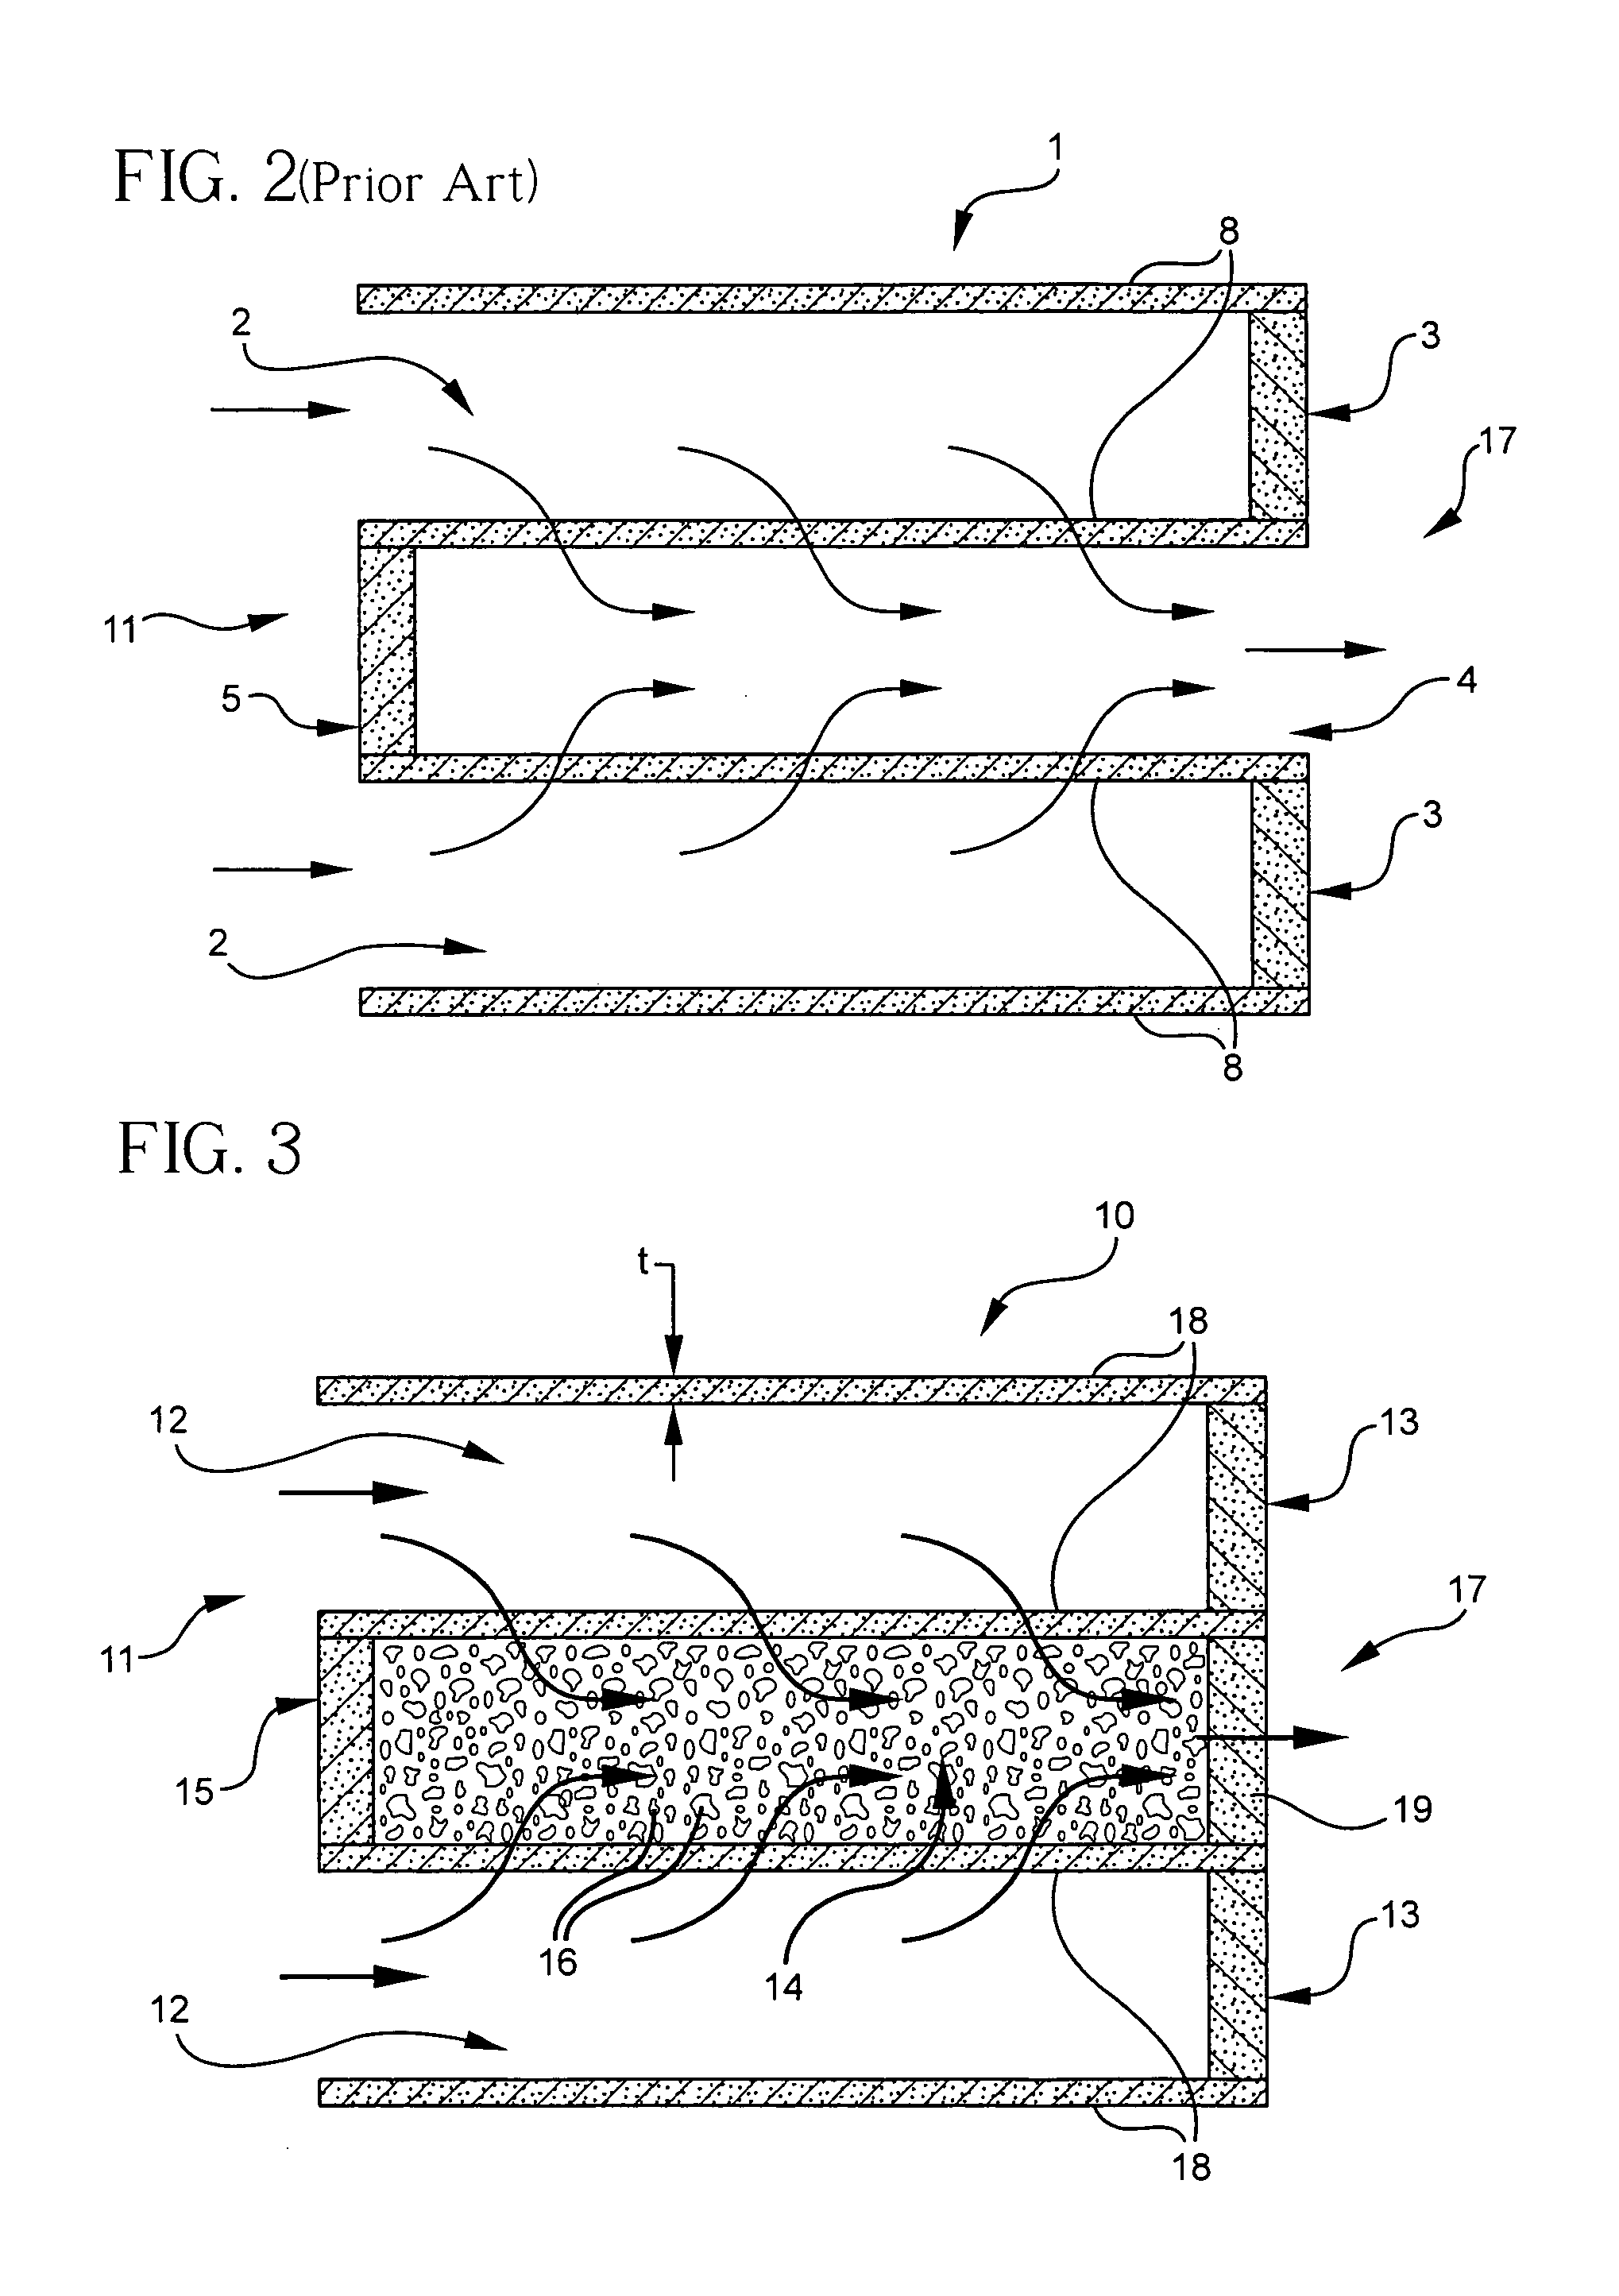 Ceramic wall-flow filter including heat absorbing elements and methods of manufacturing same